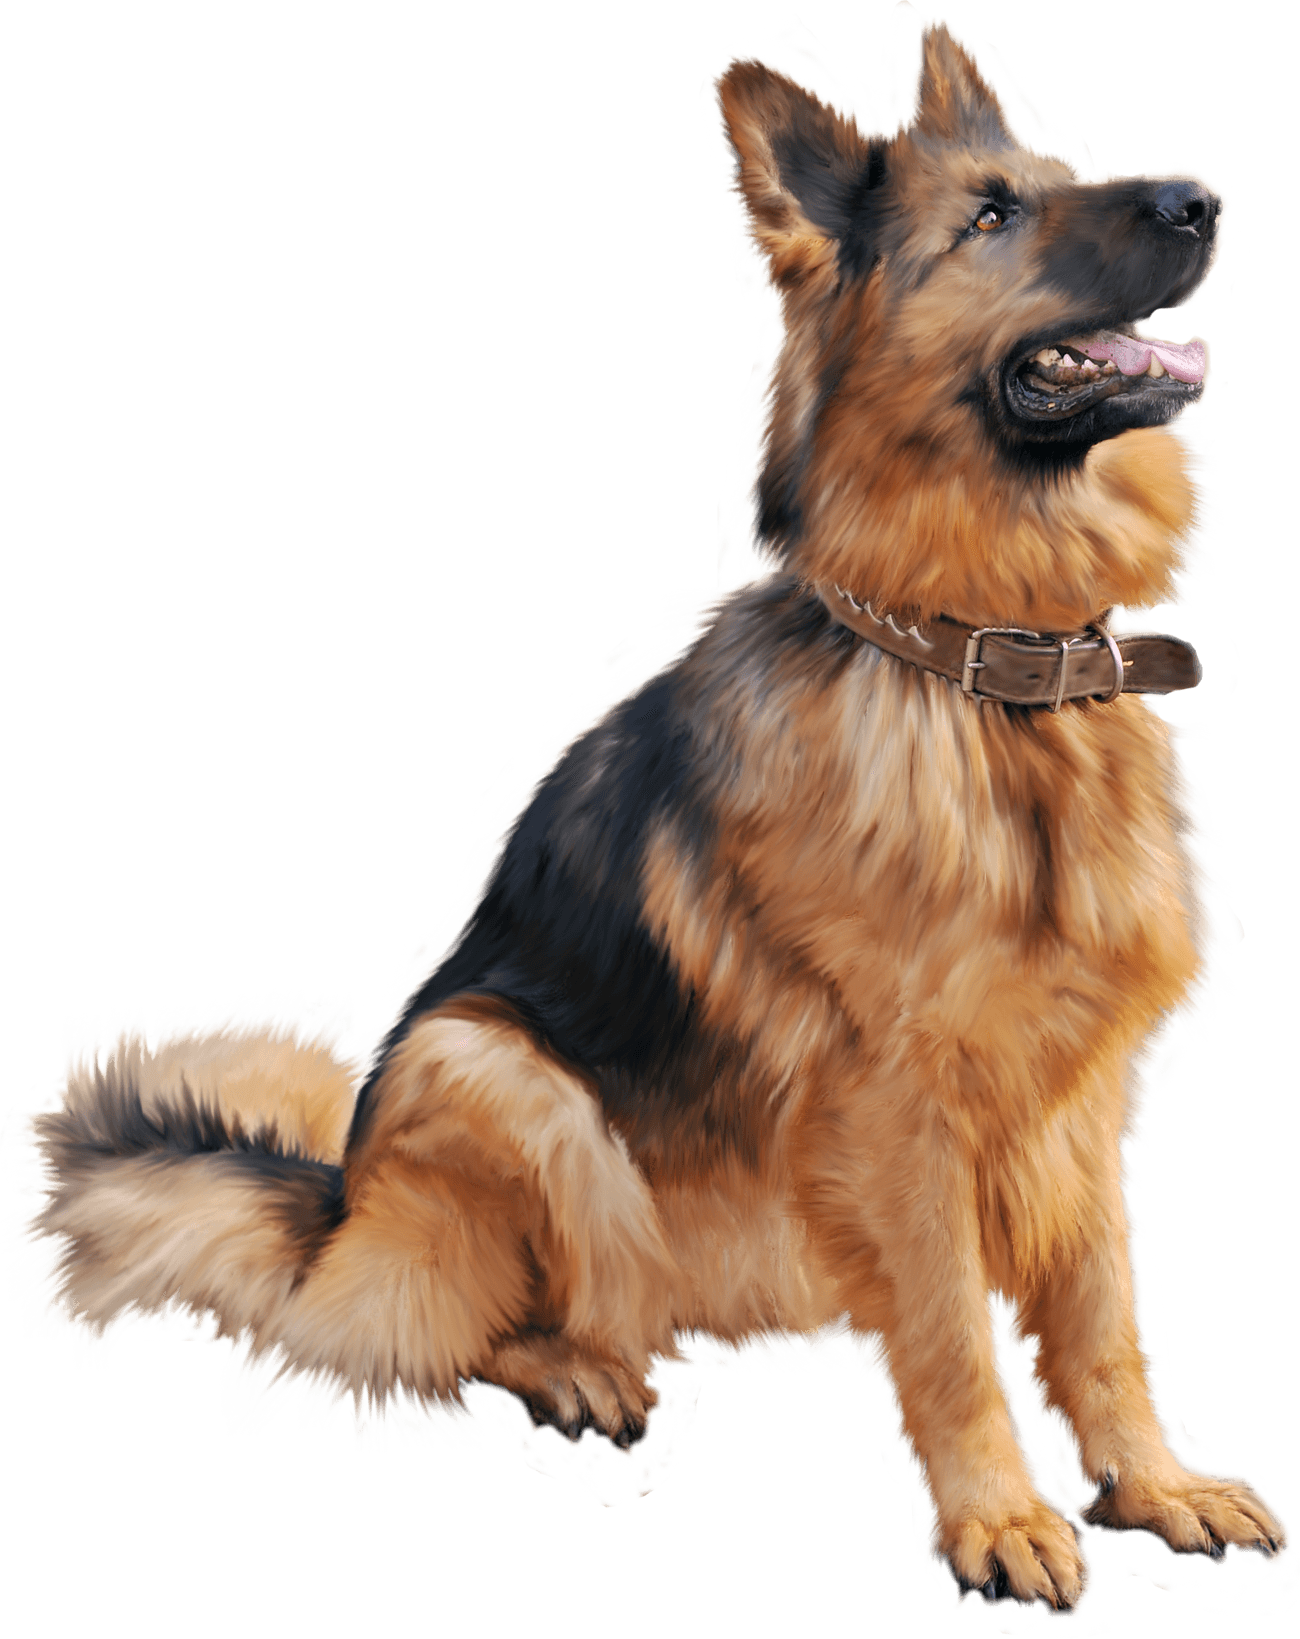 Download Dog Png Image Picture Download Dogs Hq Png Image Freepngimg ...